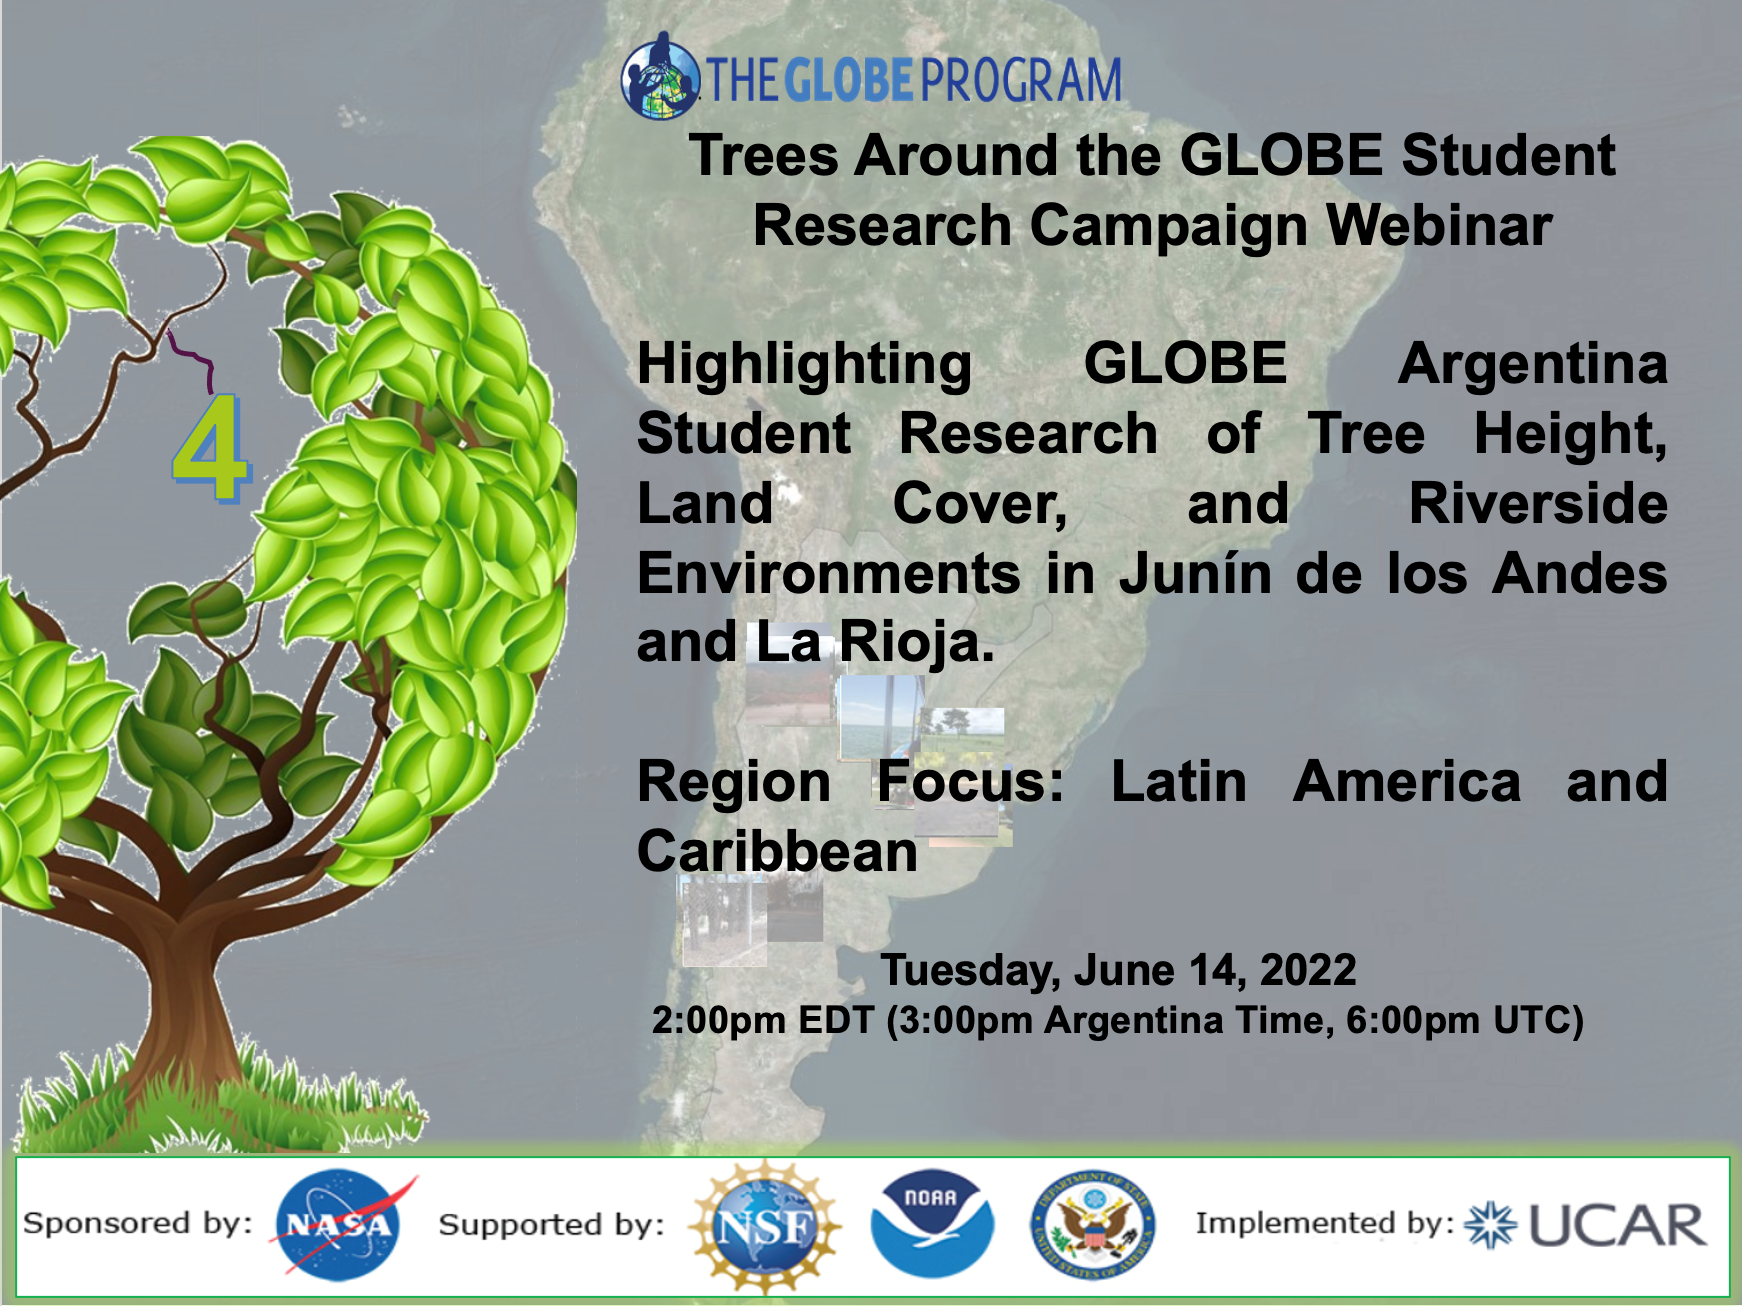 Trees Around the GLOBE 14 June webinar shareable, showing the title of the webinar